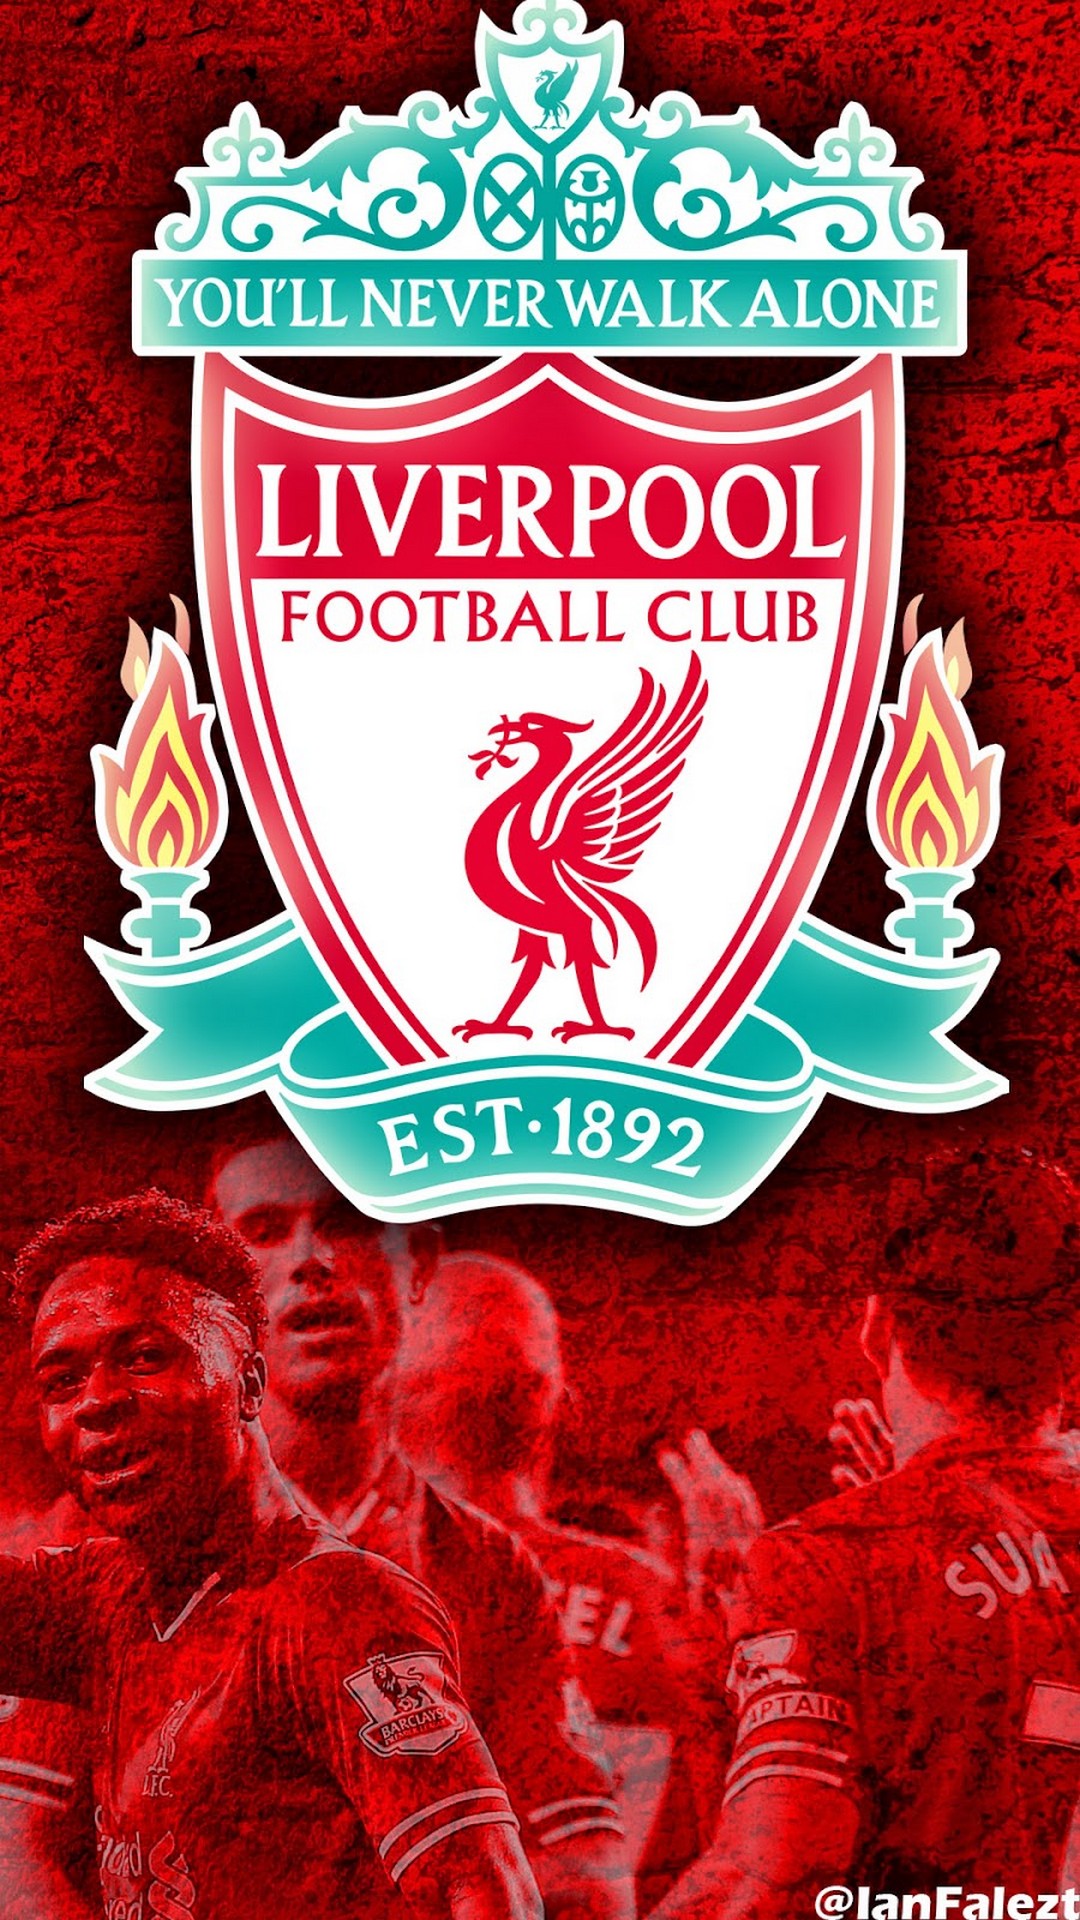 Mobile Wallpapers Liverpool With high-resolution 1080X1920 pixel. You can use this wallpaper for your iPhone 5, 6, 7, 8, X, XS, XR backgrounds, Mobile Screensaver, or iPad Lock Screen